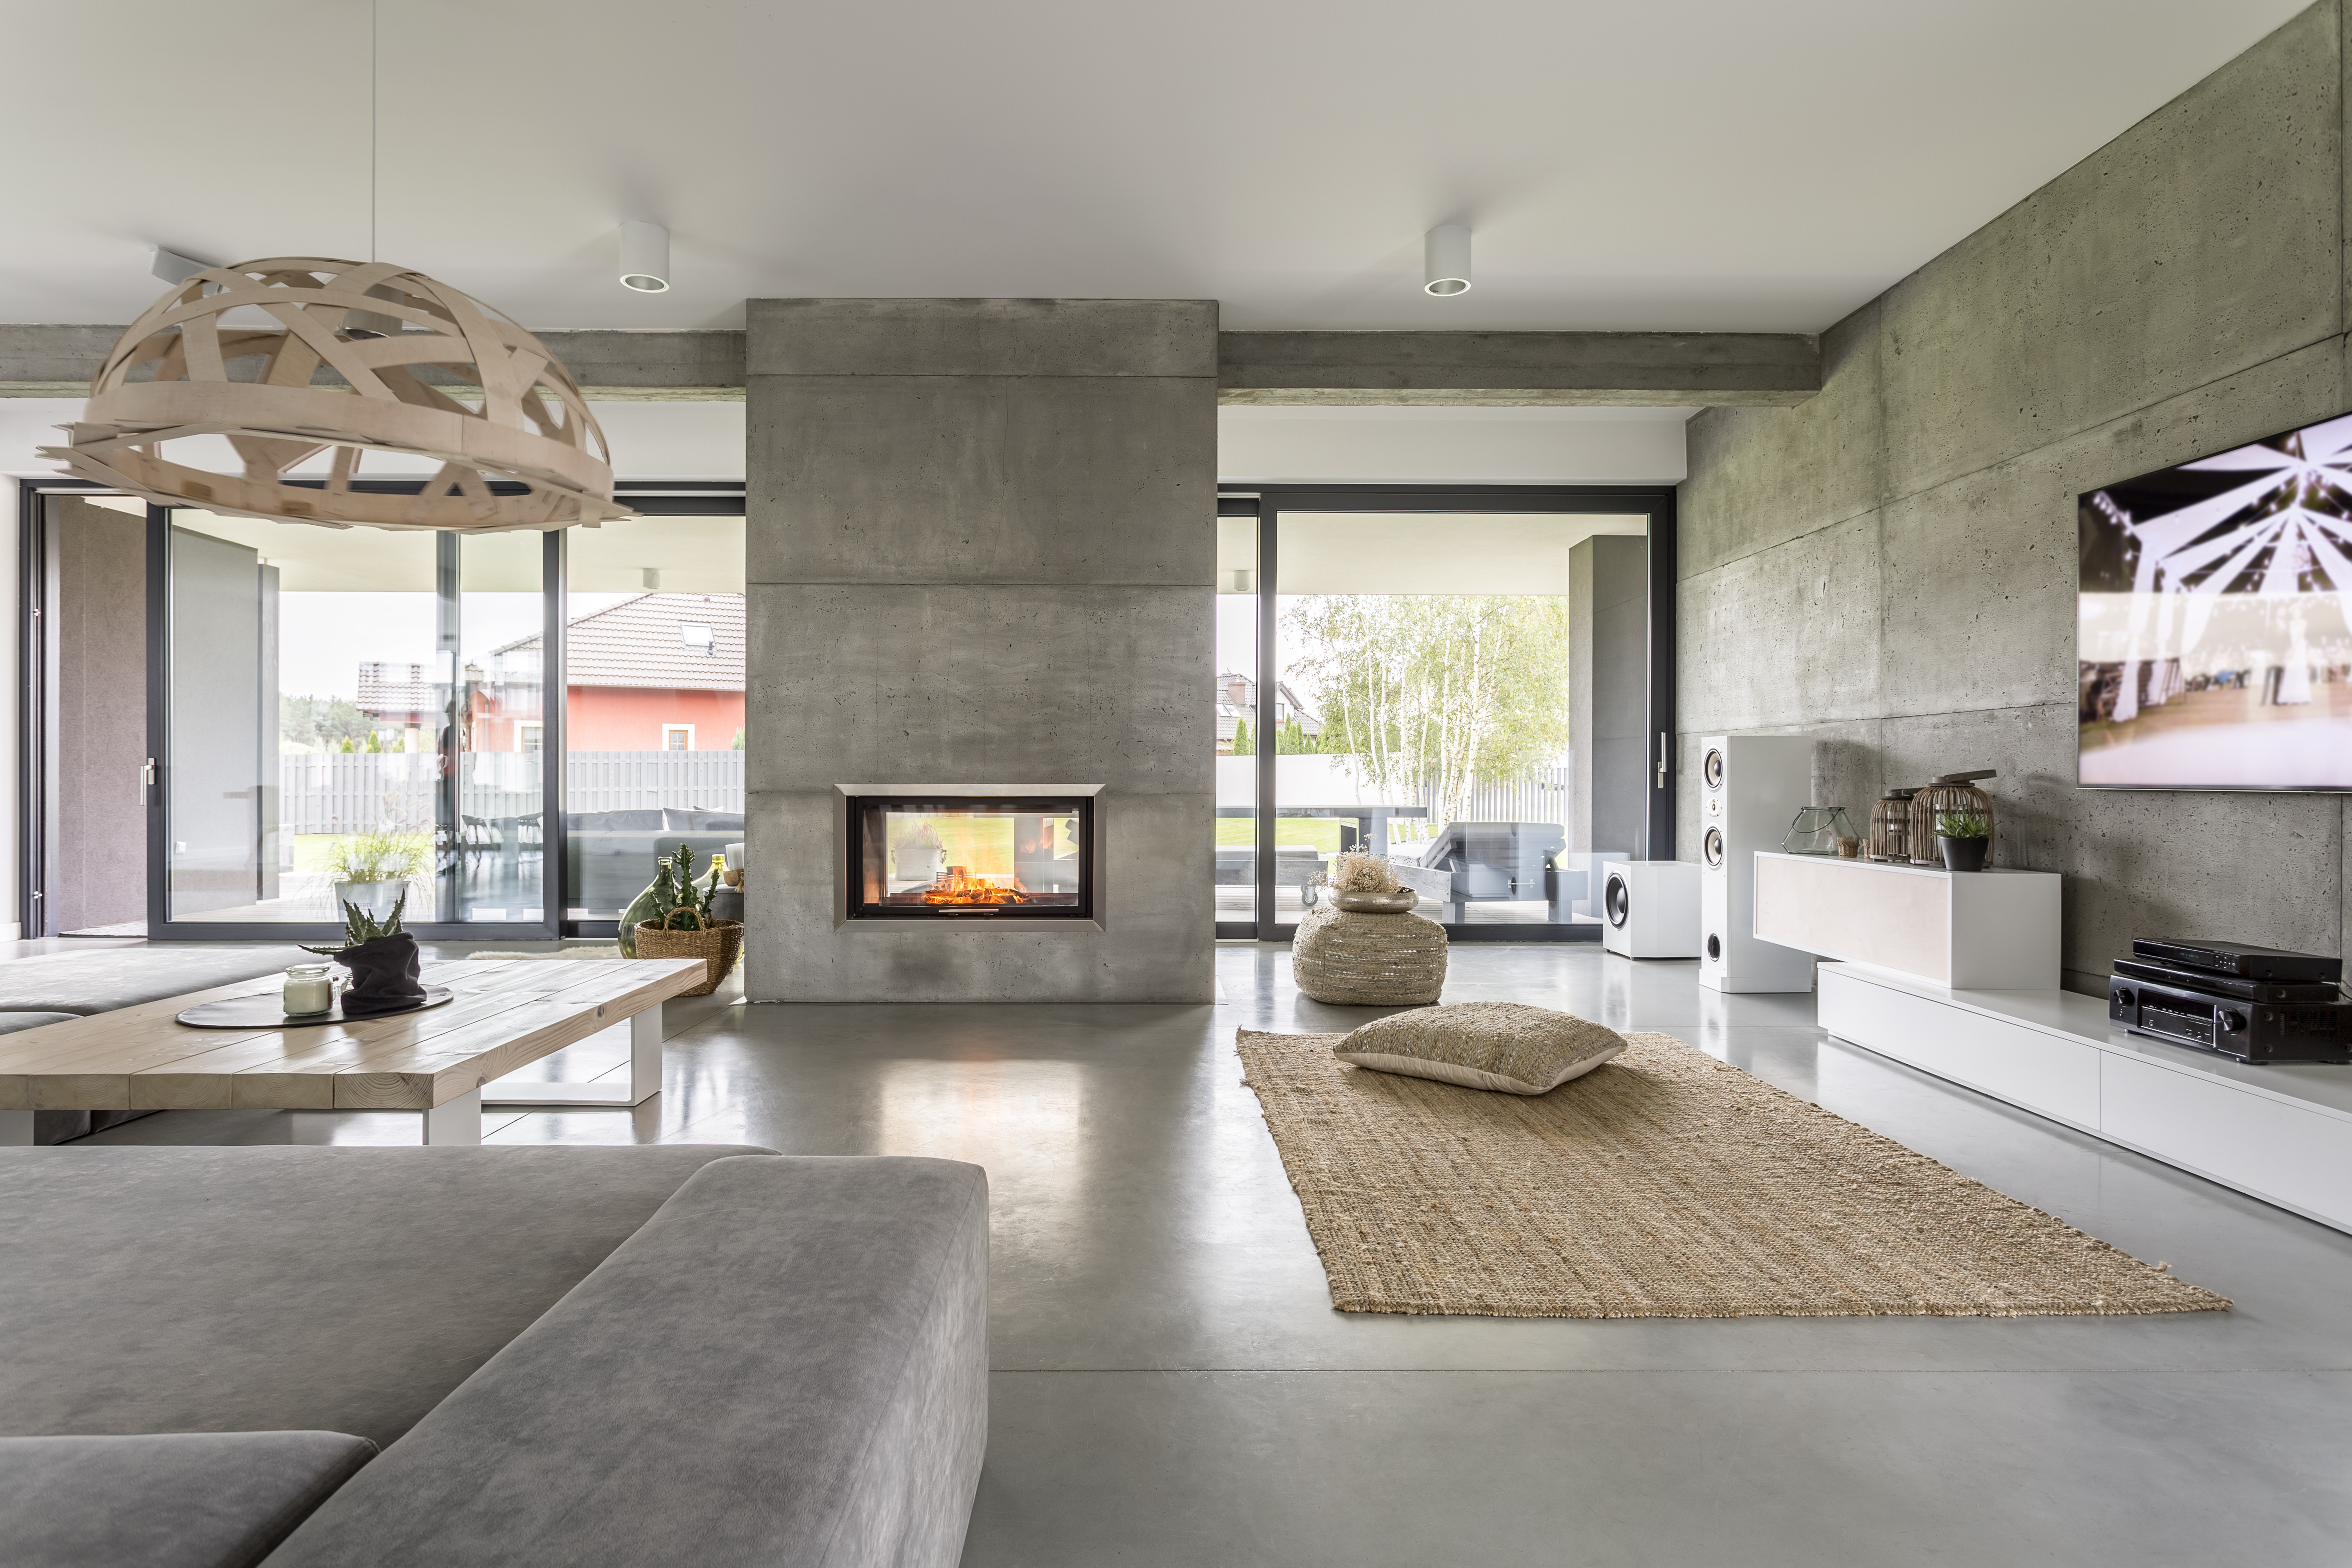 Spacious villa interior with cement wall effect, fireplace and tv.| Source: Shutterstock